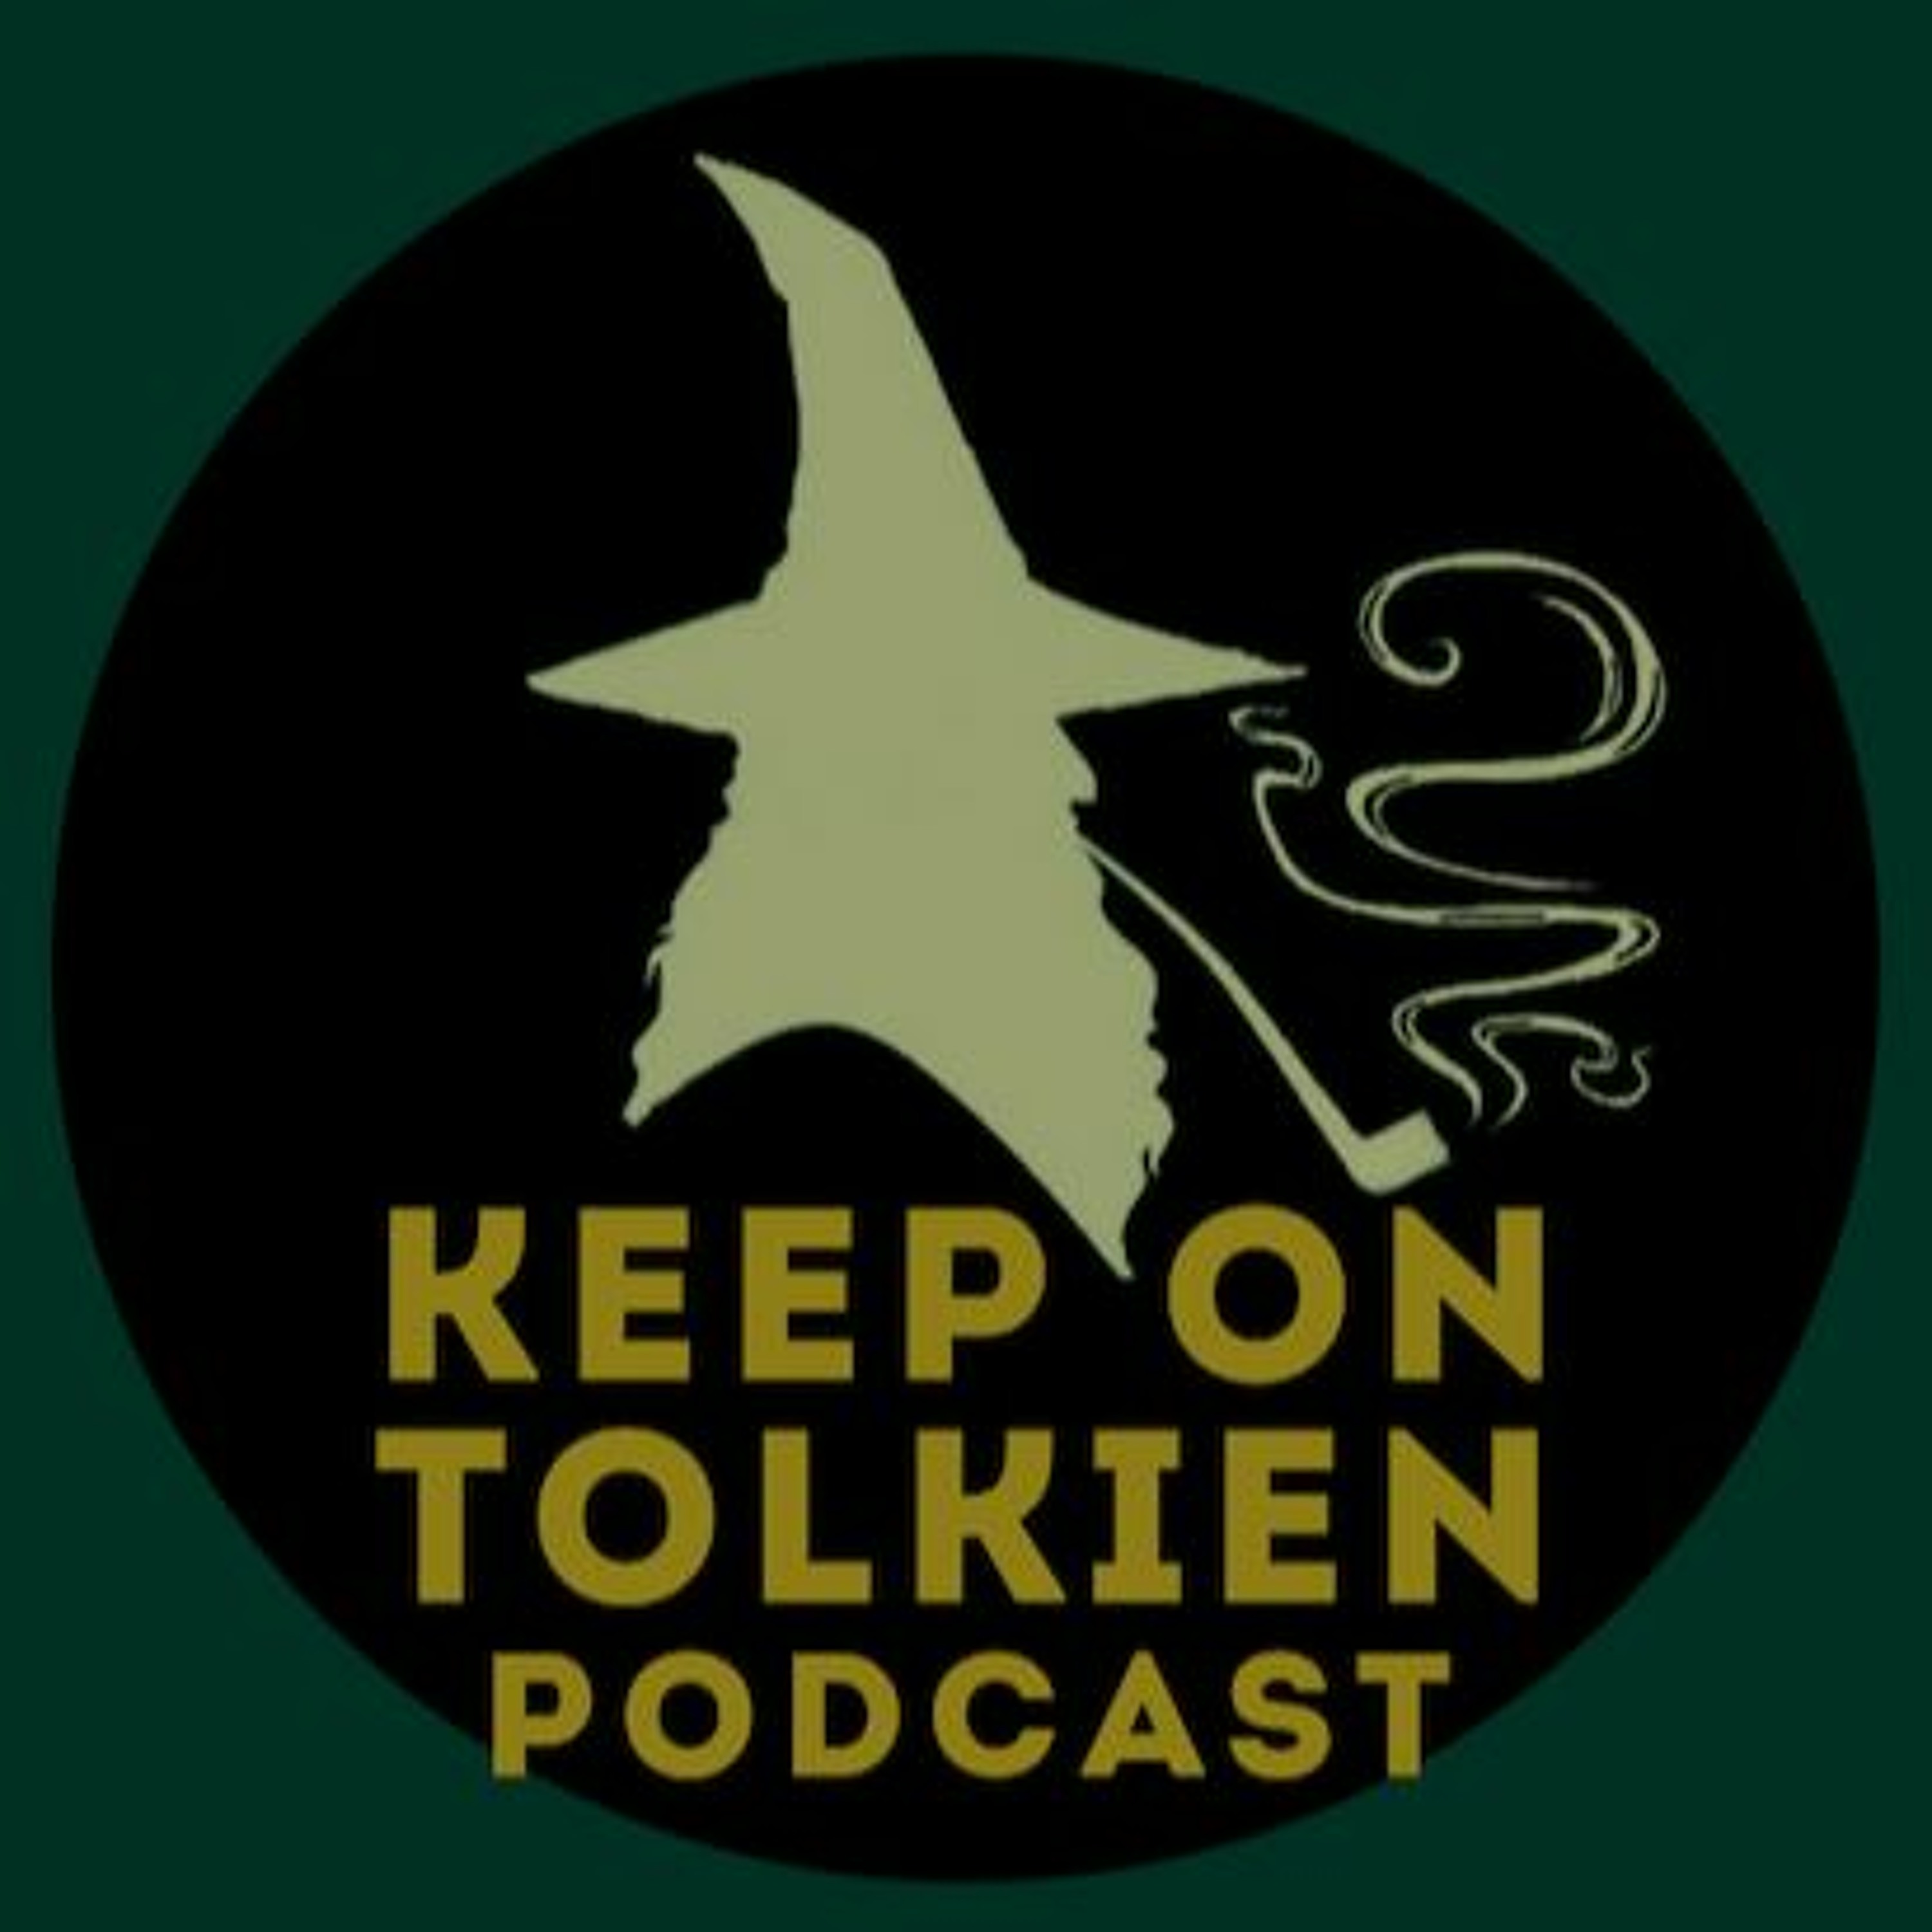 PREVIEW: Episode 66 - King Théoden Ednew (Preview)